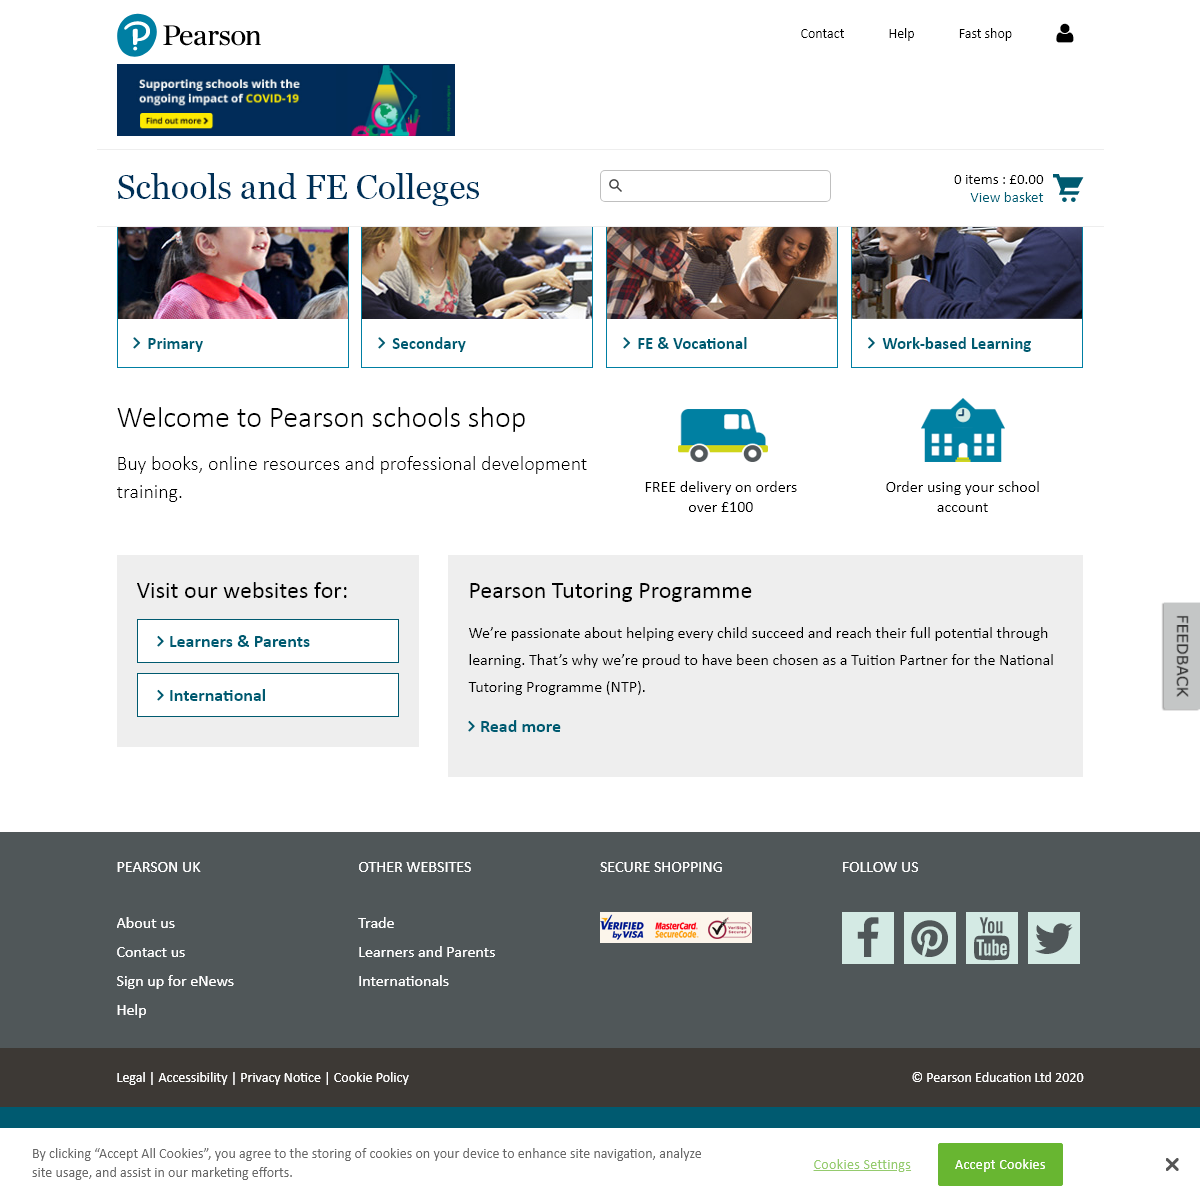 A complete backup of pearsonschoolsandfecolleges.co.uk